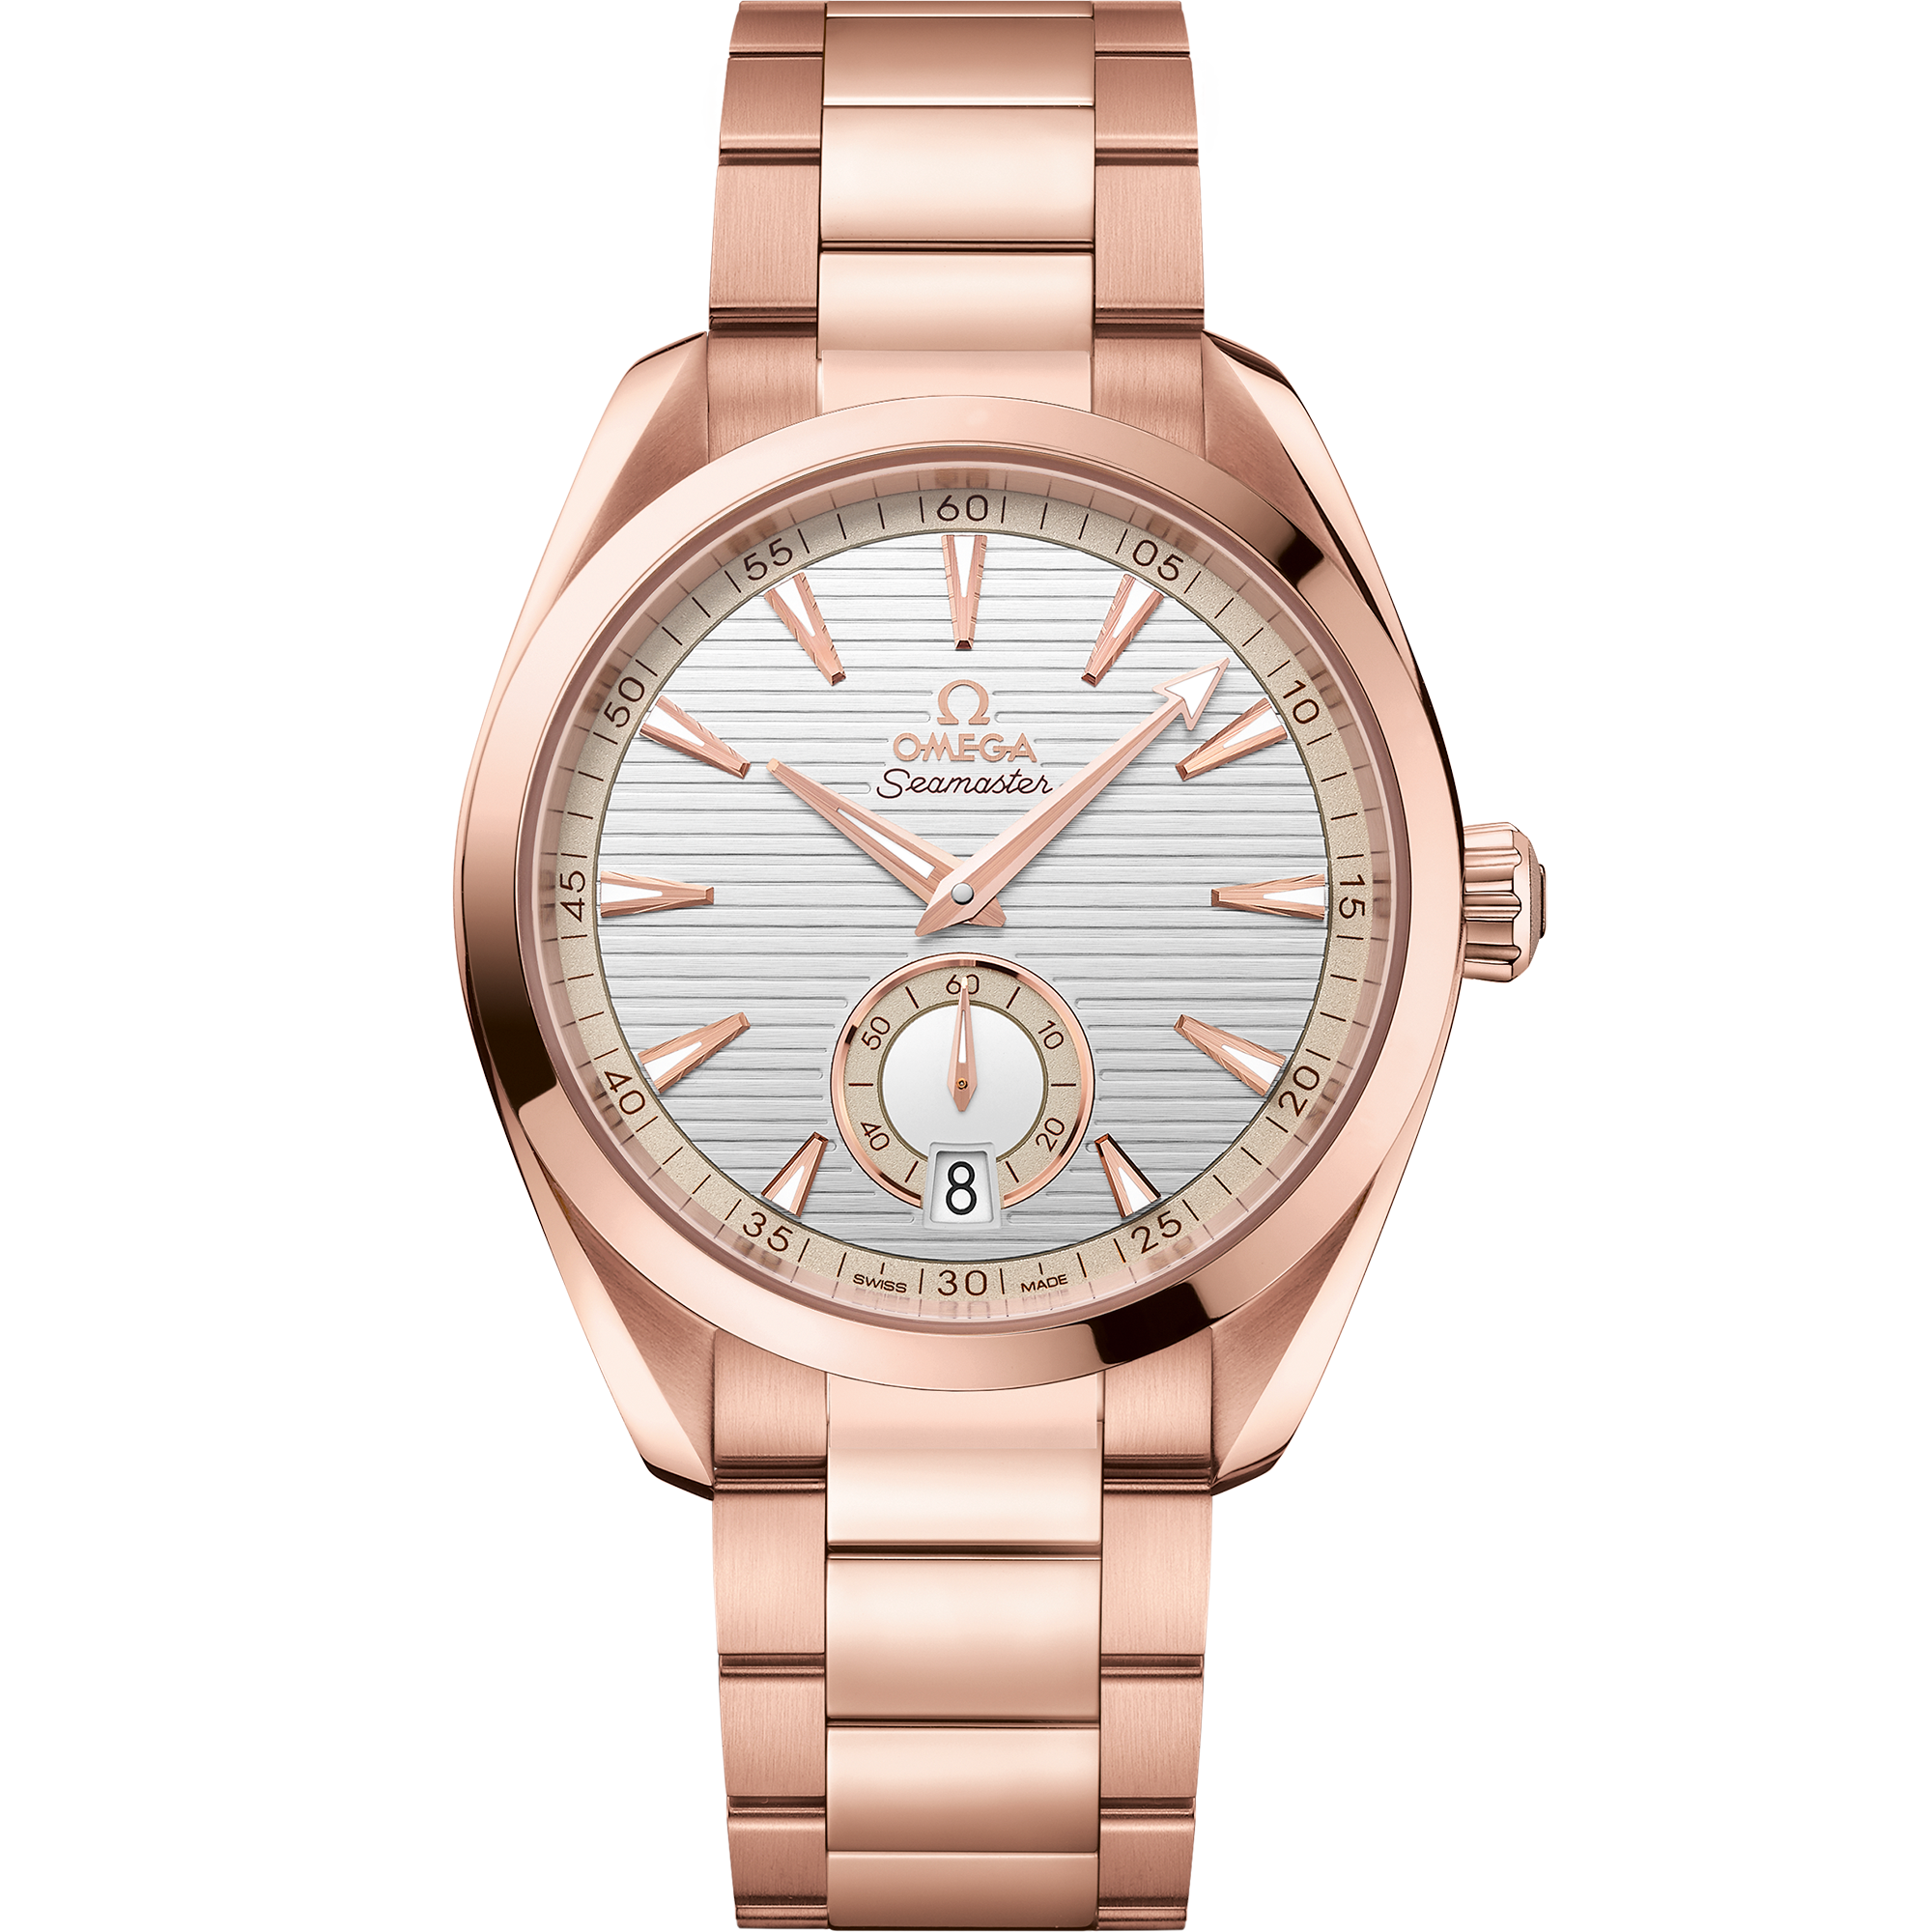 Seamaster 41 mm, ouro Sedna™ em ouro Sedna™ - 220.50.41.21.02.002